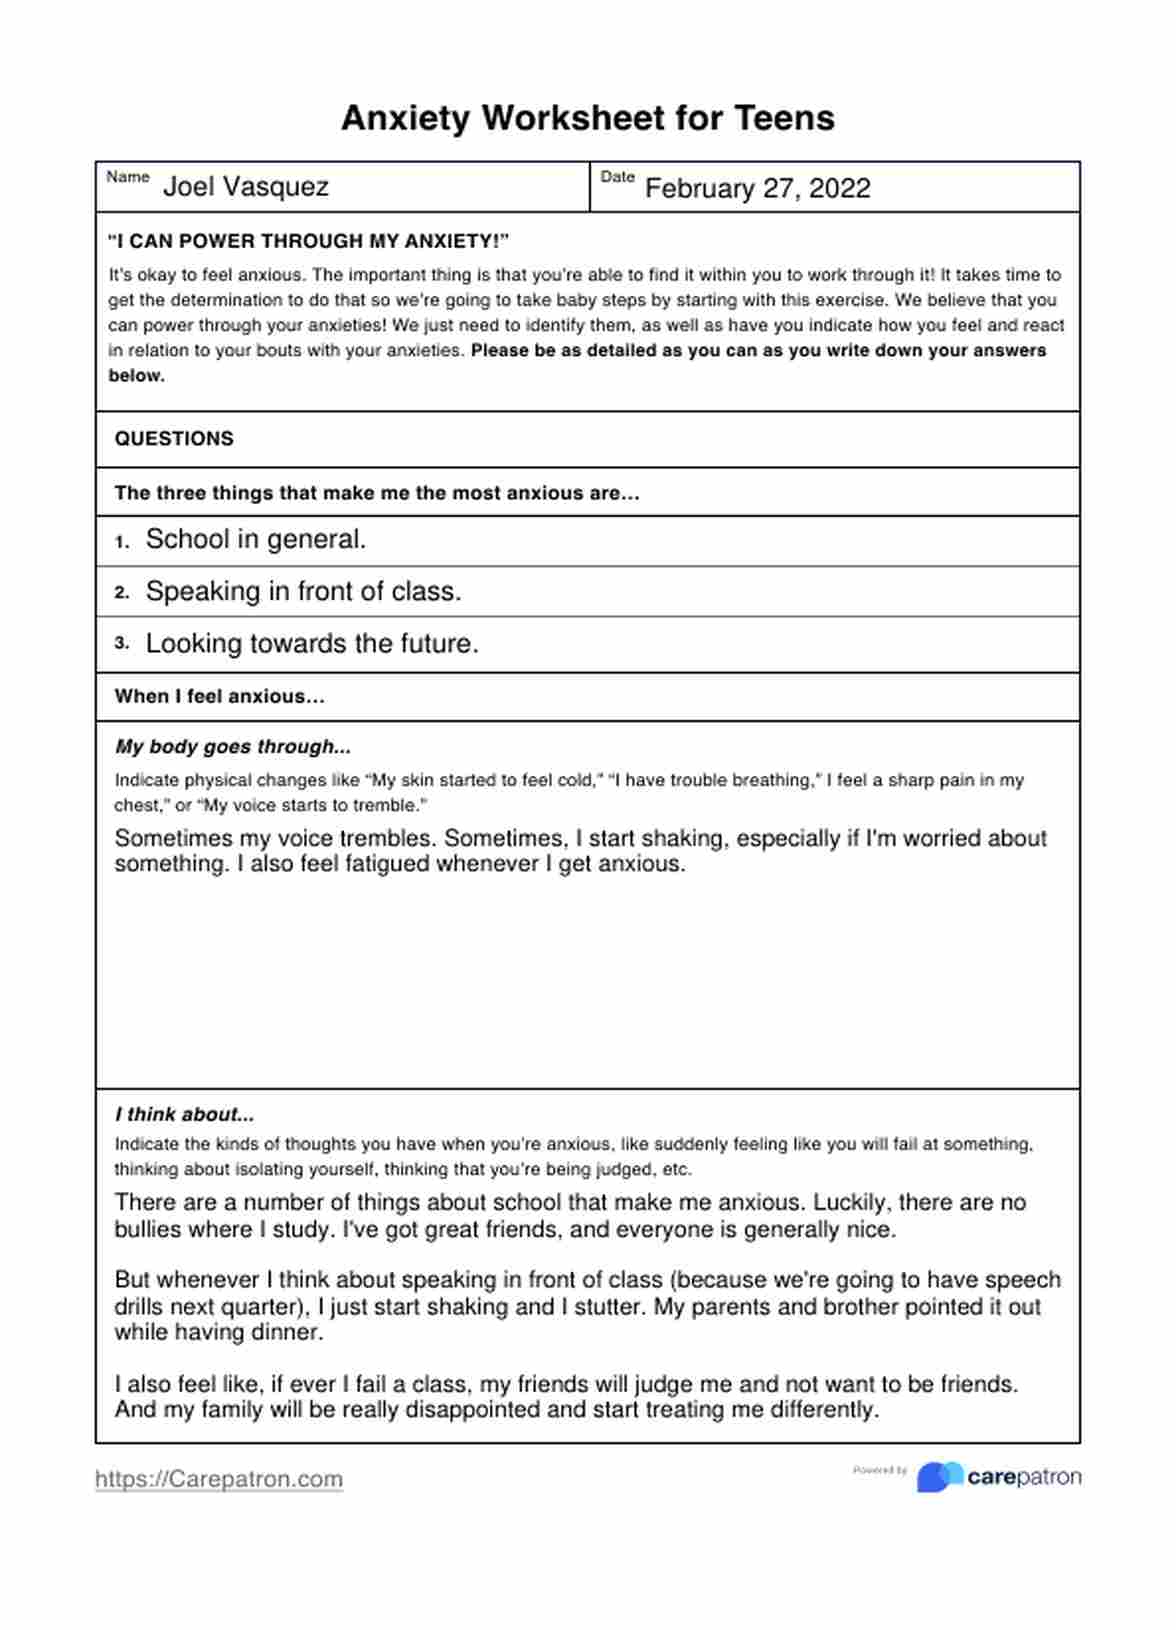 Anxiety Worksheets For Teens PDF Example